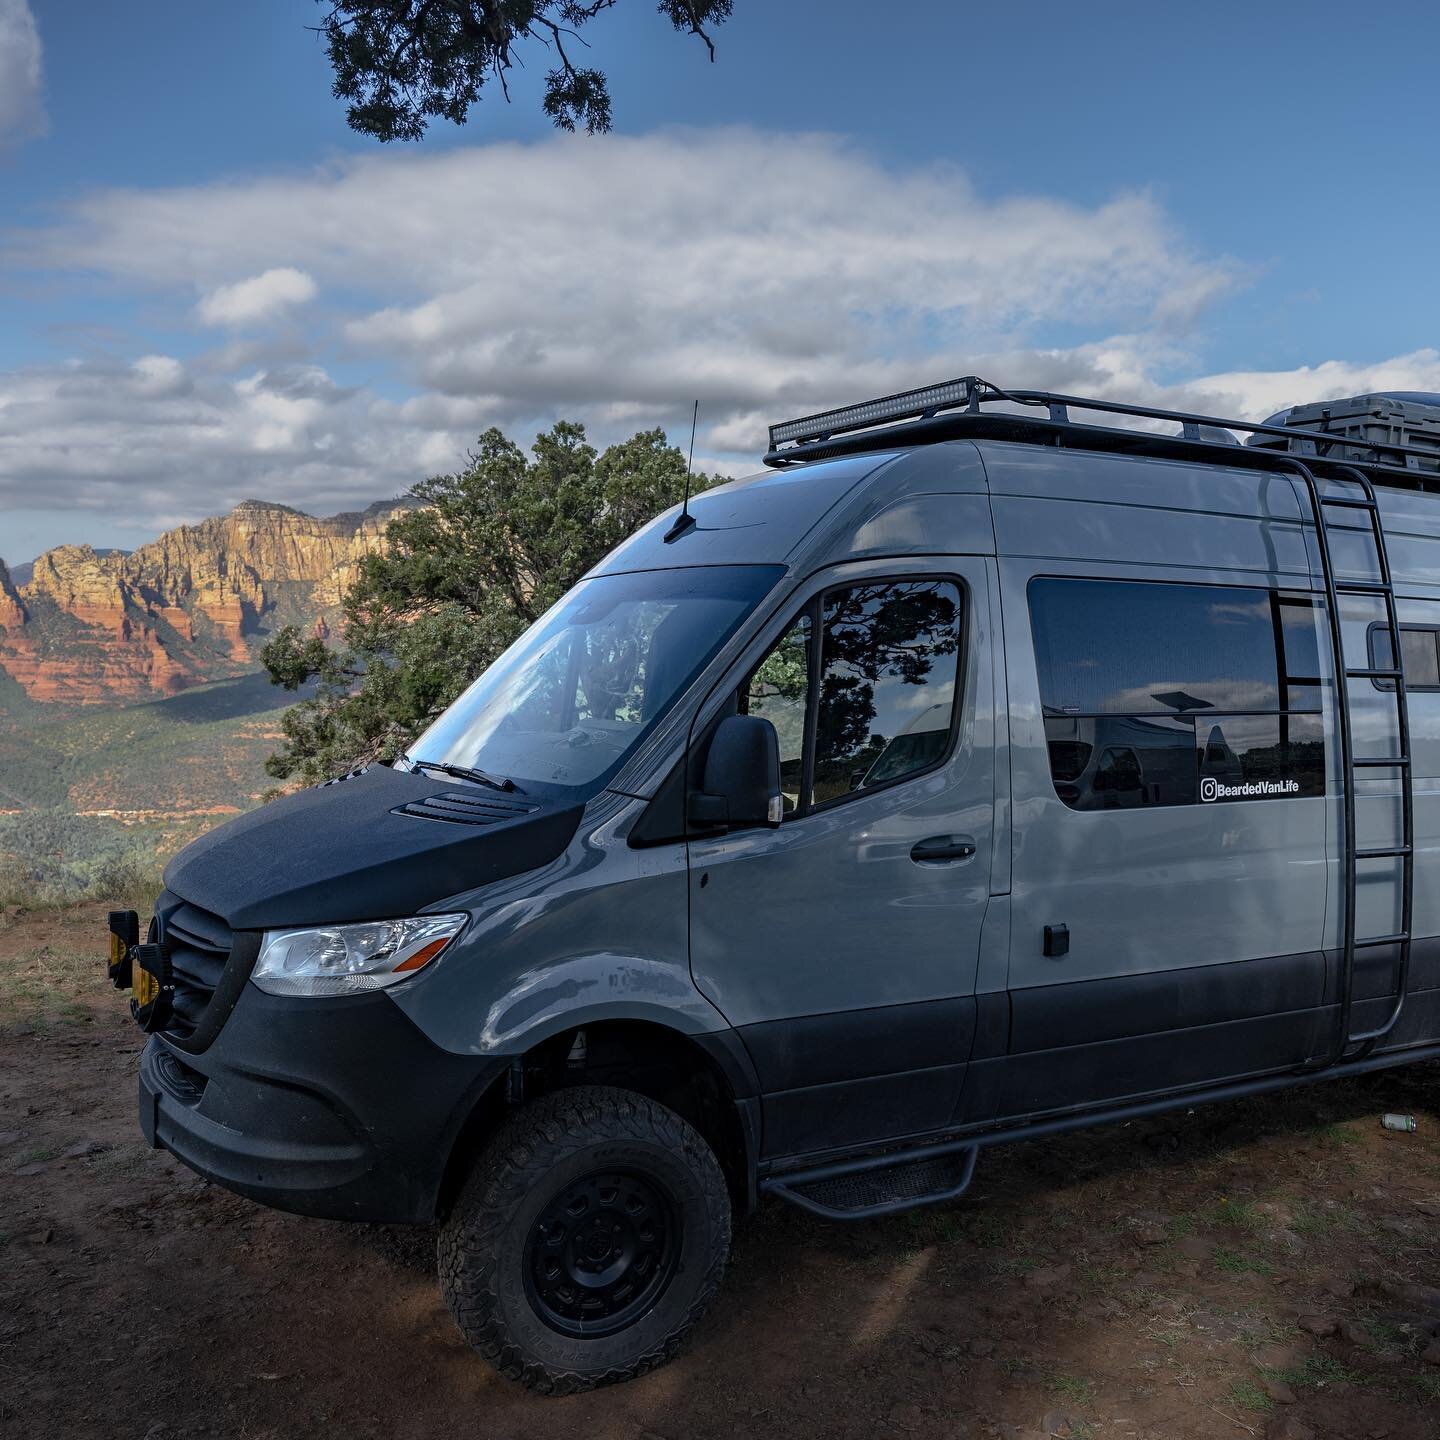 Sedona is a magical place and love putting Althea in magical places!! With all the &ldquo;wild camping&rdquo; closures around Sedona&hellip; this spot is going to stay close to me, unless you come with ☺️😊🚐

As always I look forward to connecting, 